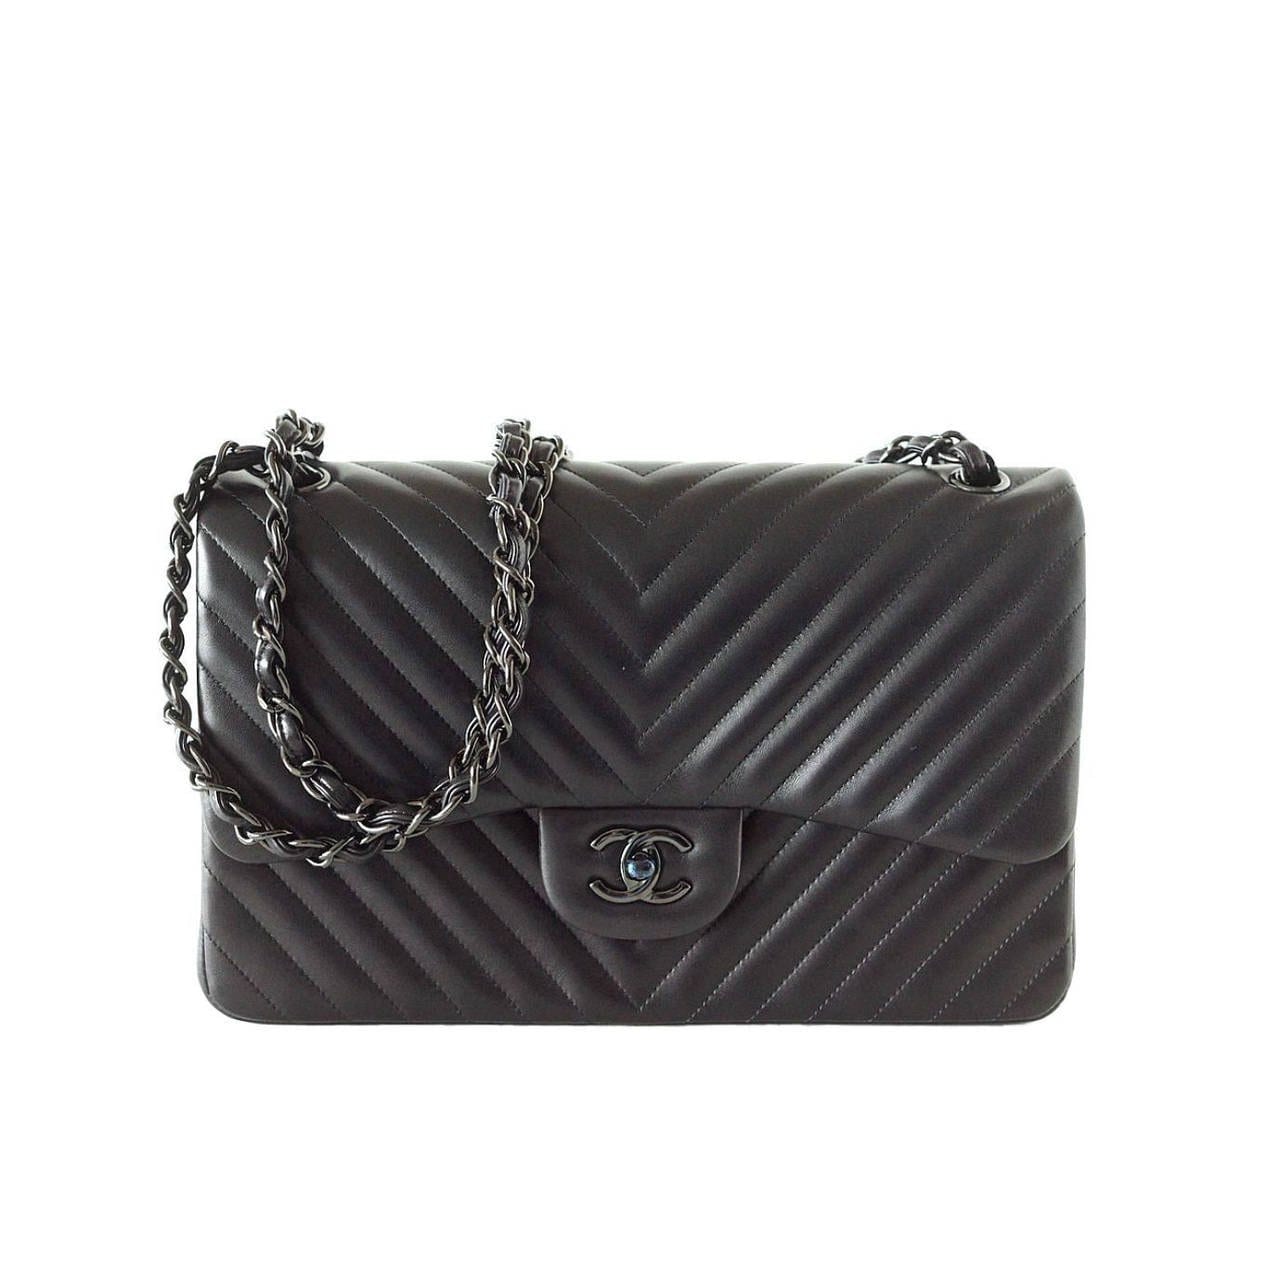 Chanel Pockets Cosmetic Bags for Women